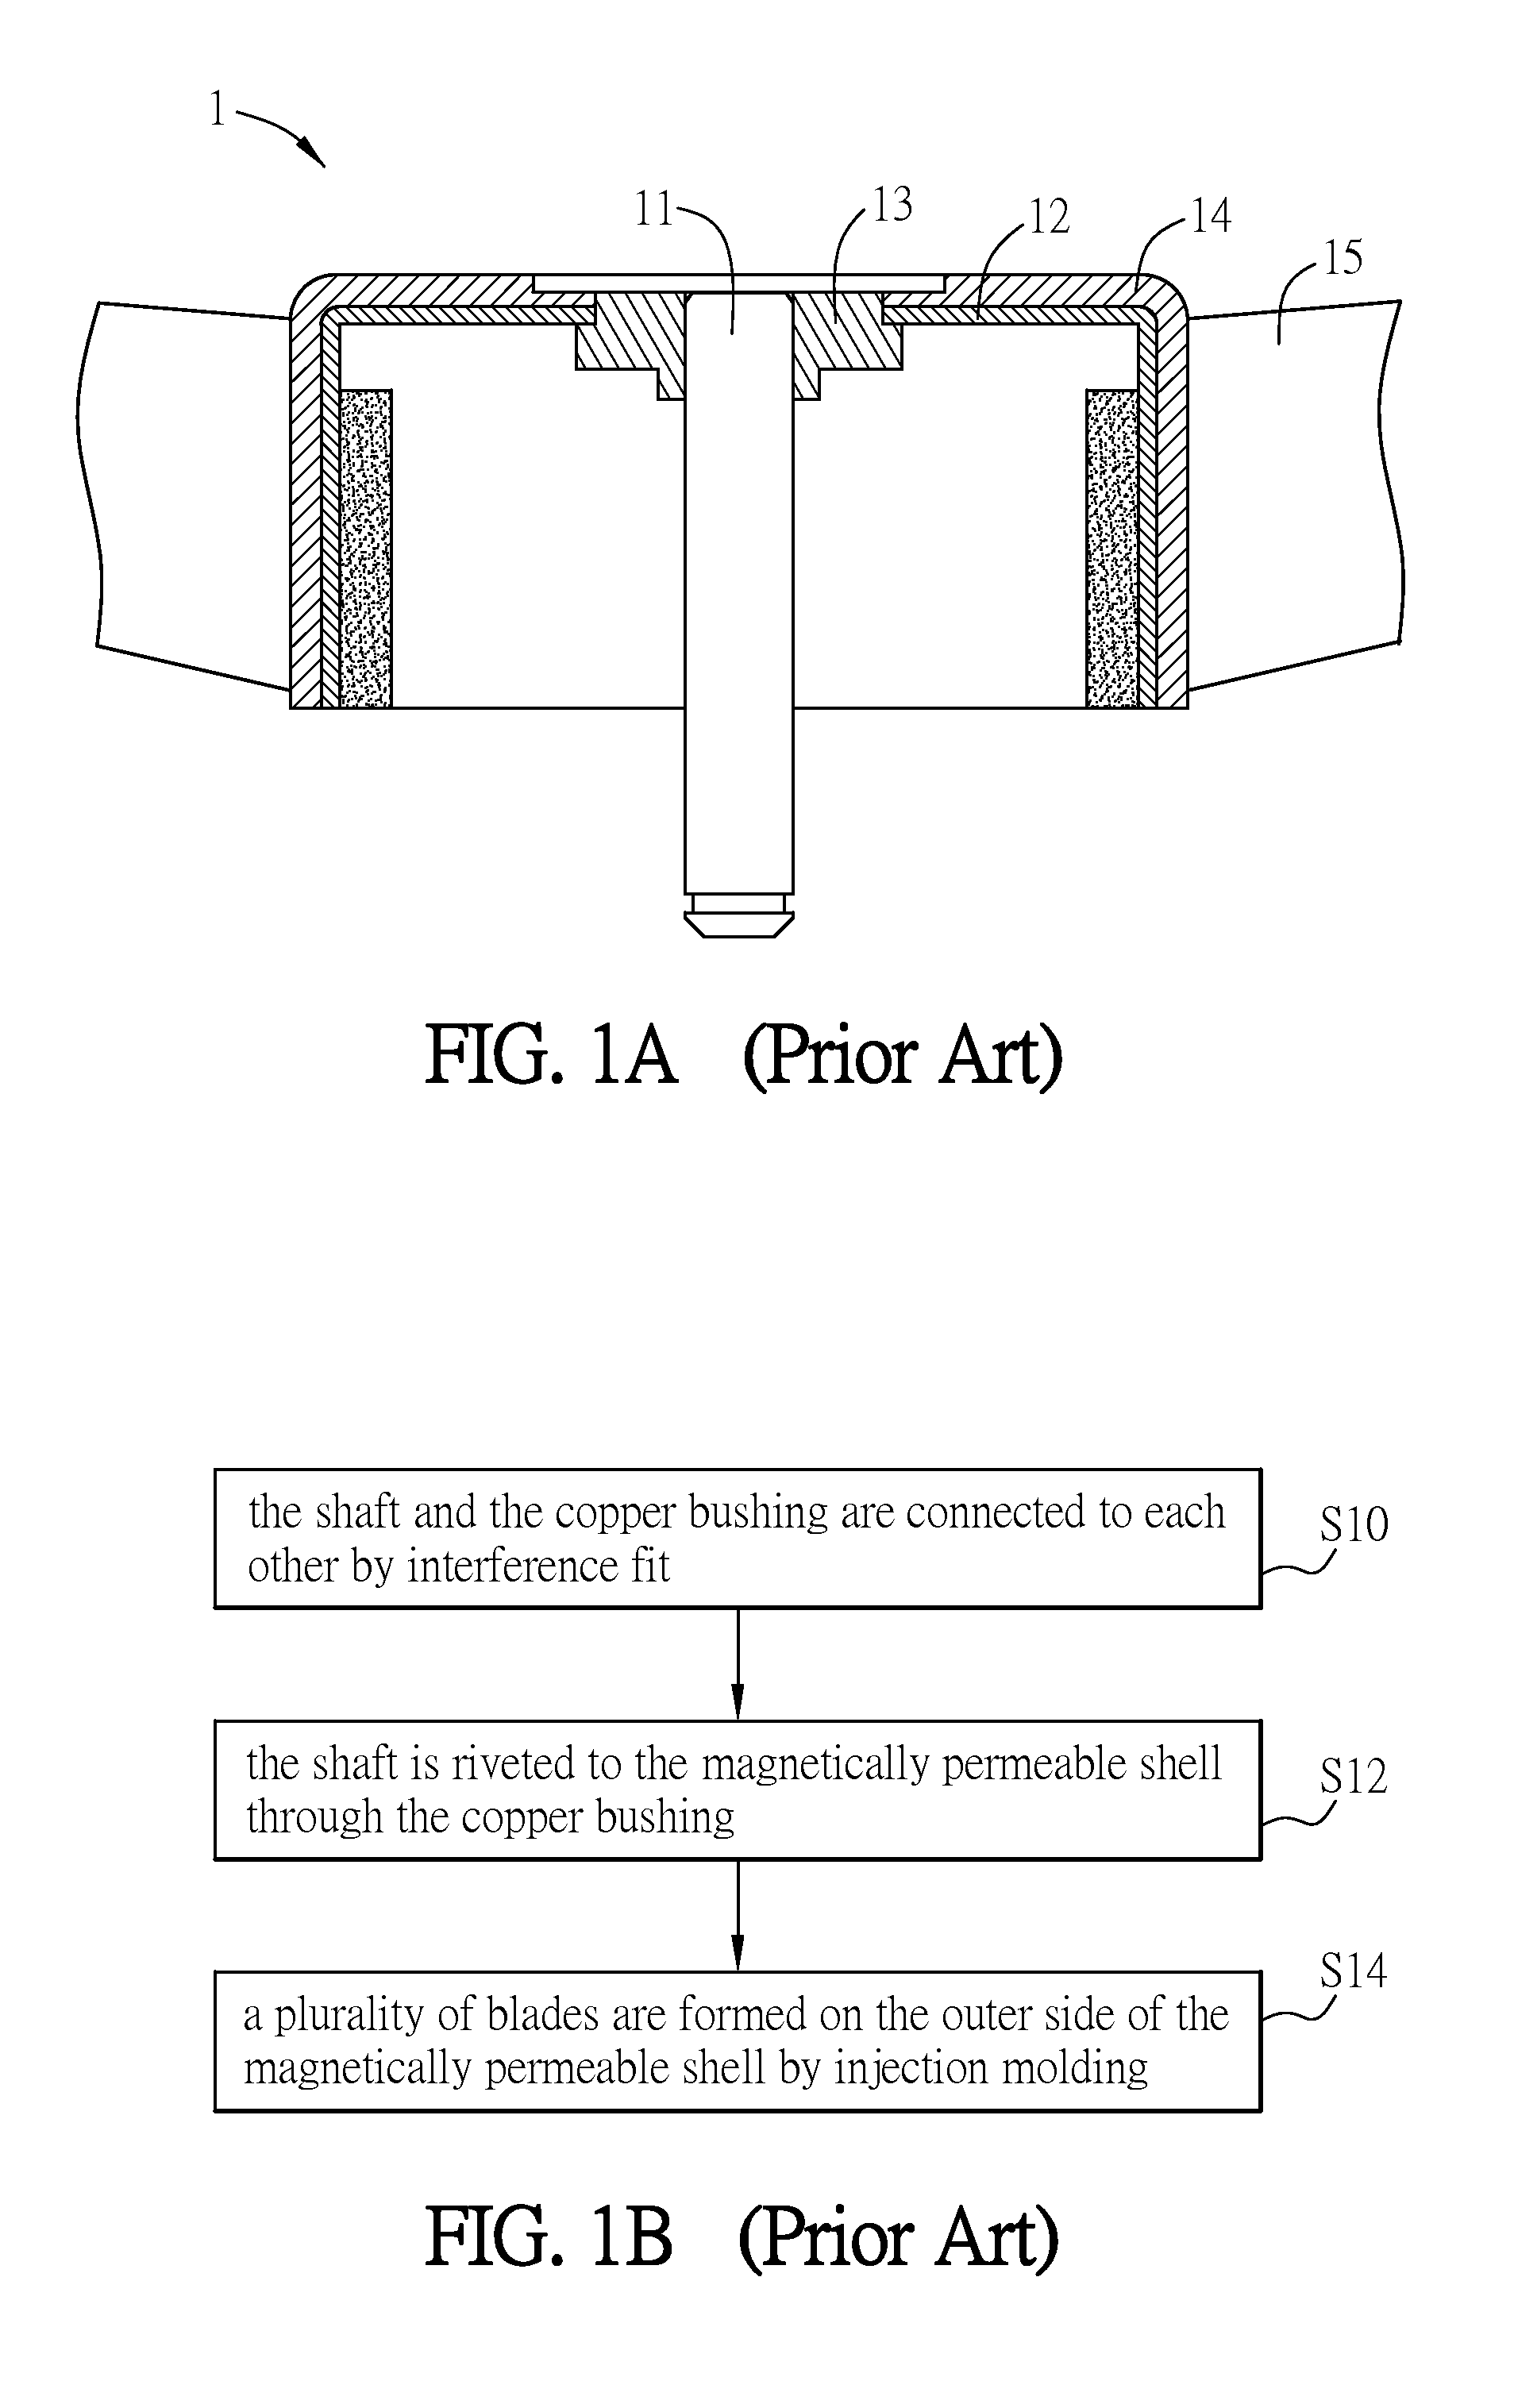 Rotor struture of fan and manufacturing method thereof